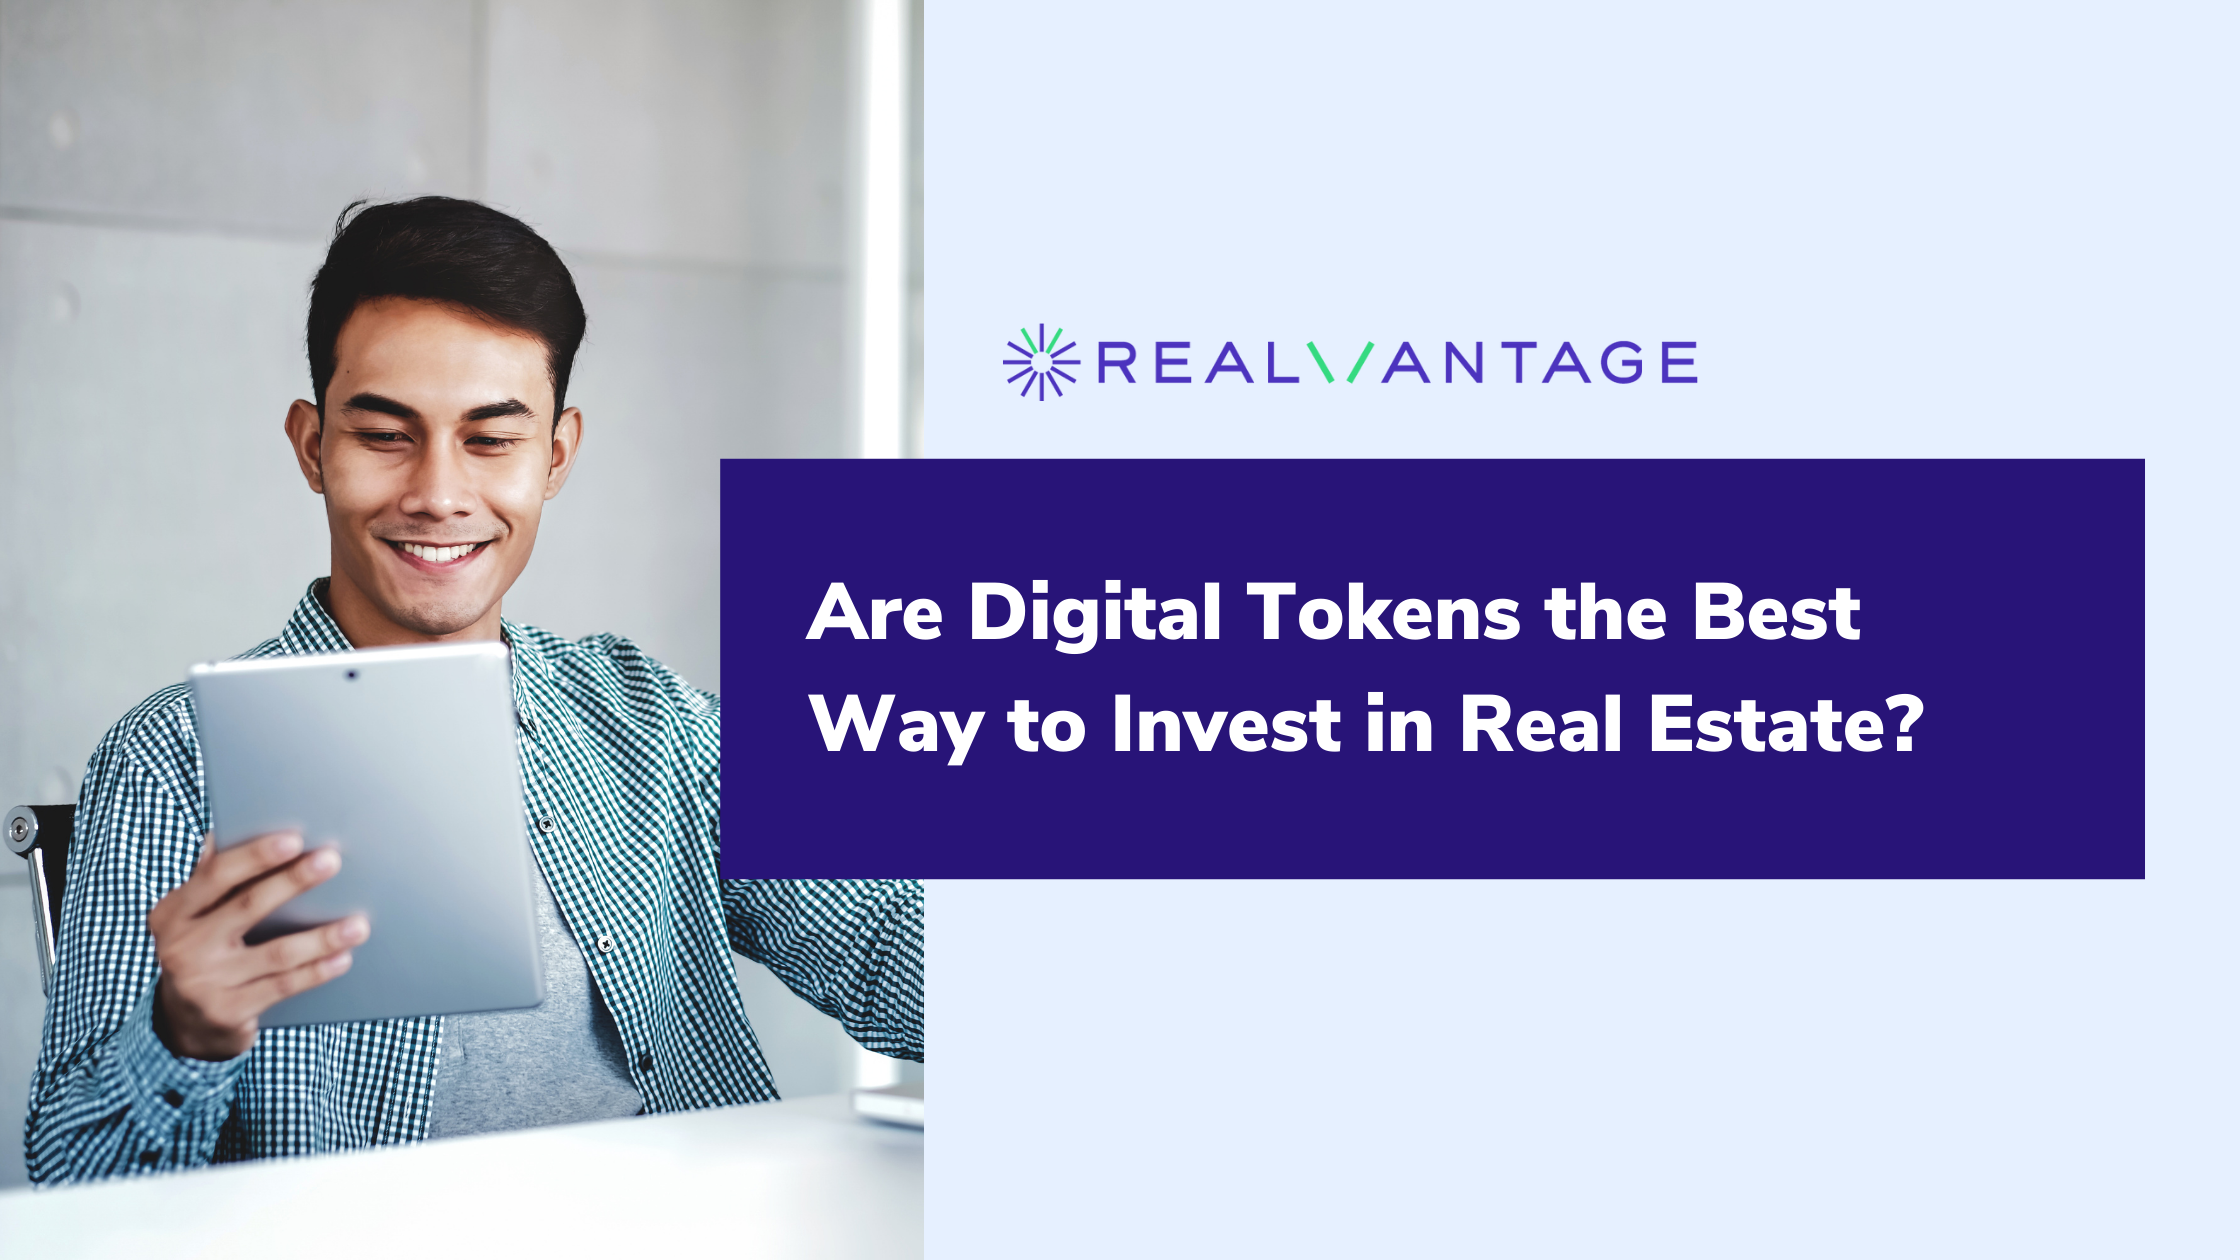 Are Digital Tokens the Best Way to Invest in Real Estate?